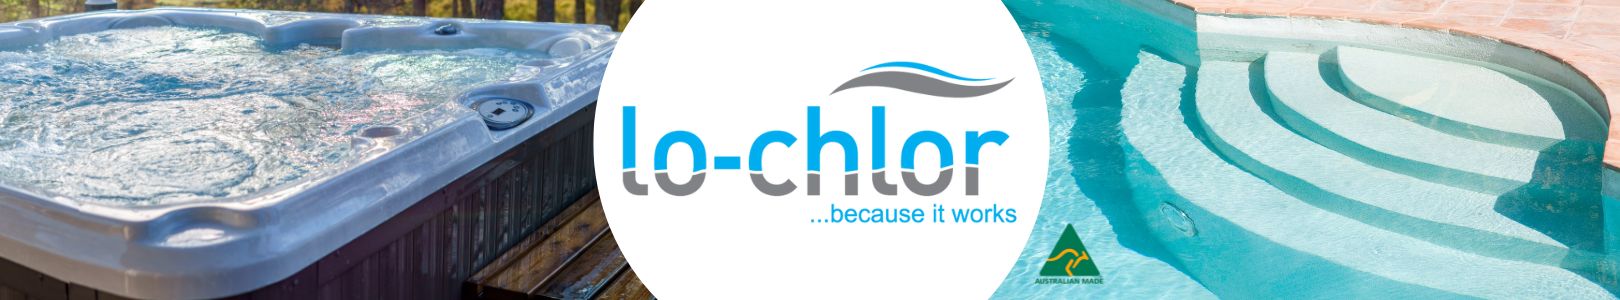 <p style="text-align: center;">100% Australian owned and Australian made, Lo-Chlor Chemicals specialise in pool and spa water treatment.</p>
<p style="text-align: center;">Innovation and design remain at the forefront of Lo-Chlor&rsquo;s strategy to bring the pool and spa industry the highest quality and performance in specialty pool and spa chemicals.</p>